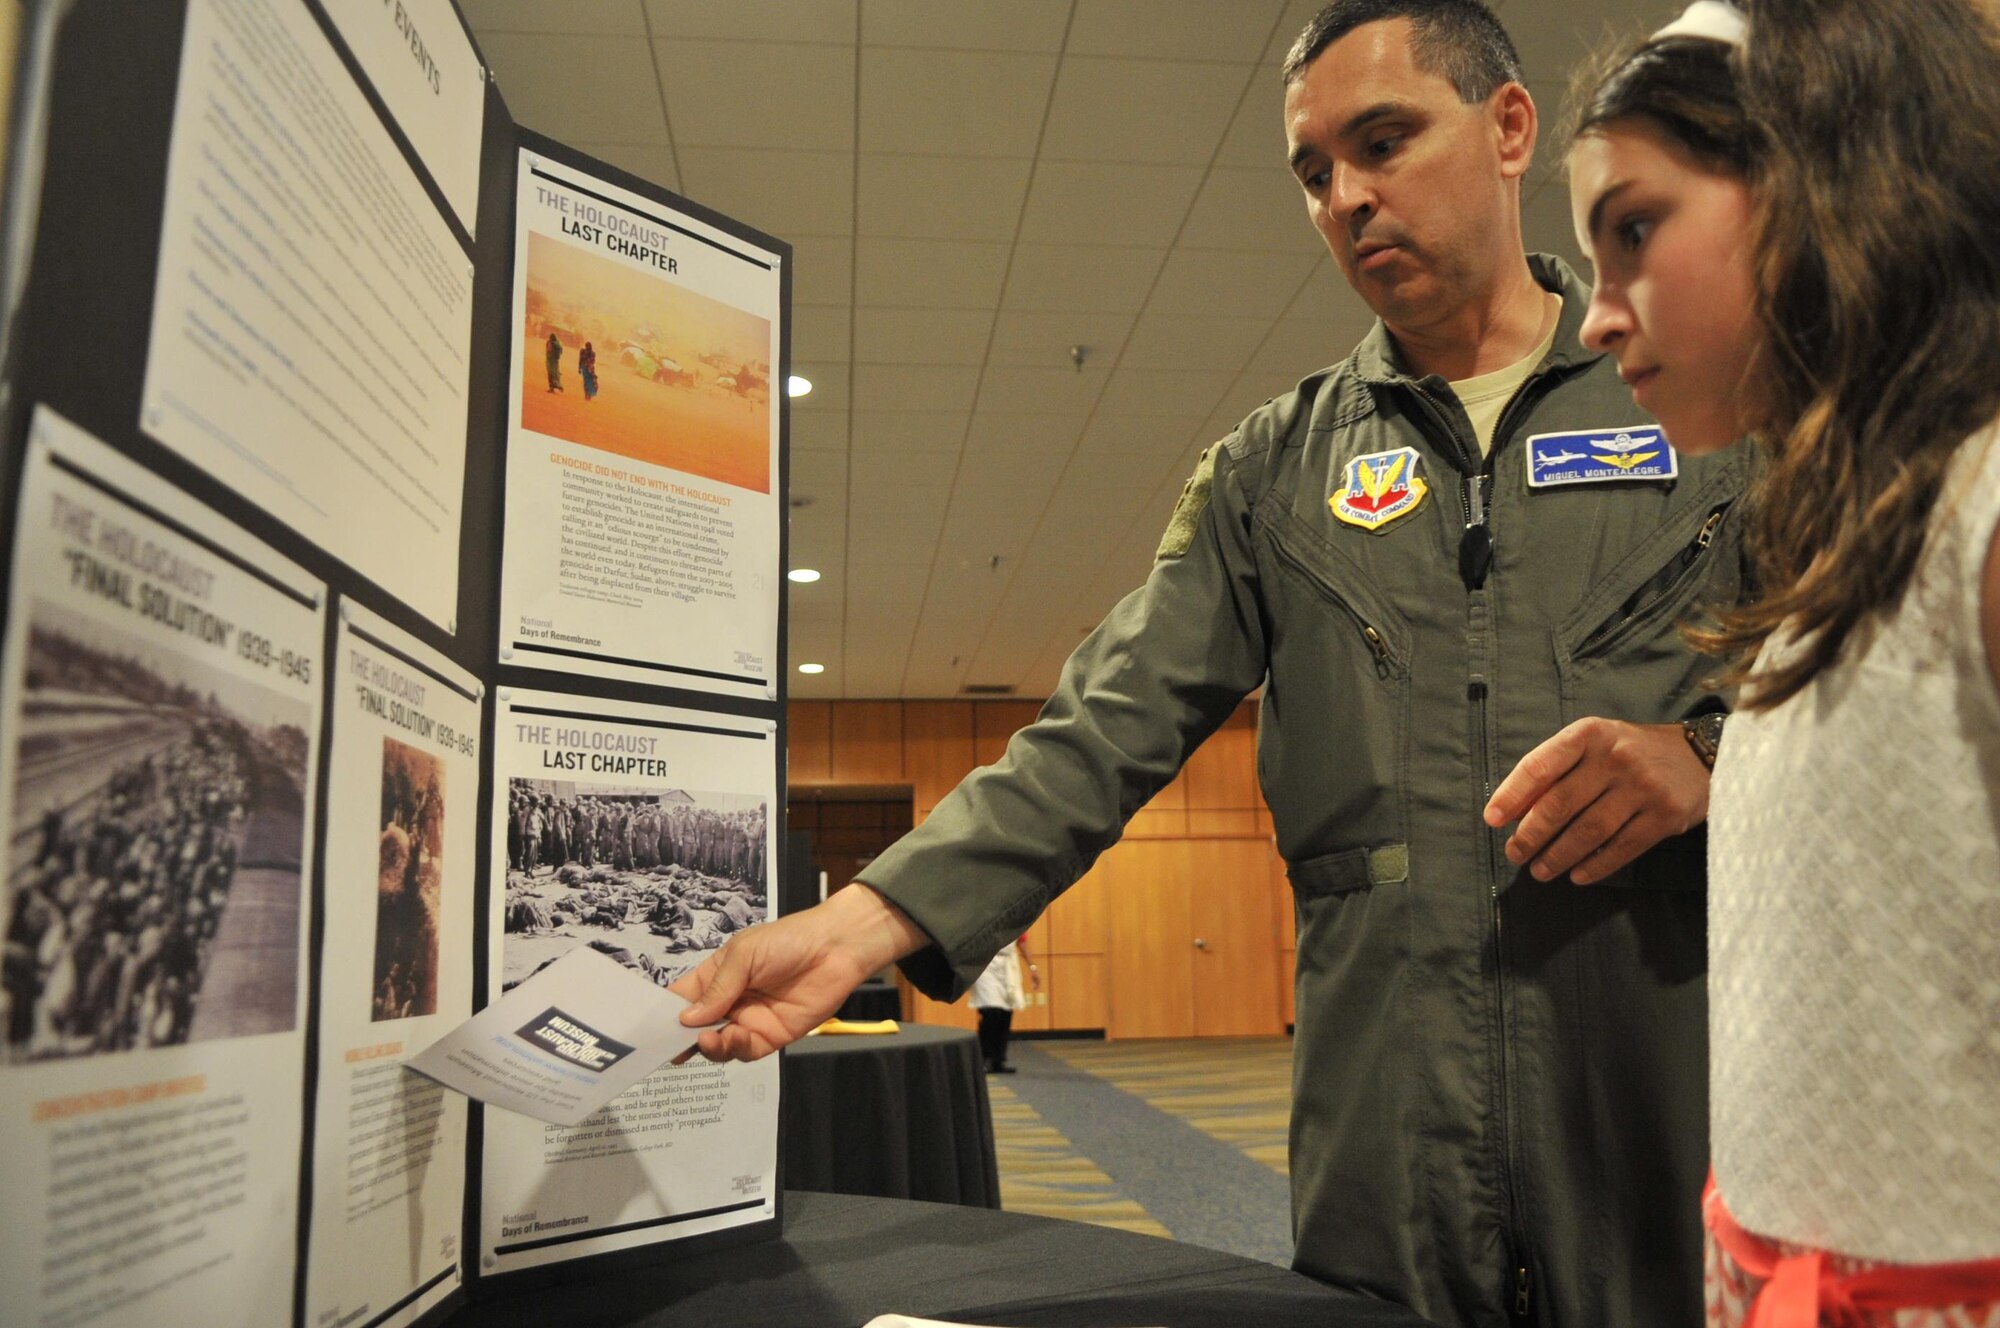 Lt. Col. Luis Montealegre, 1st Air Force A9 deputy director, reads holocaust information with his daughter Cristina Montealegre during the Holocaust Remembrance Day event May 4 at the Horizons Community Center. The event is also known in the Hebrew language as Yom Hashoah. The day corresponds with the 27th day of Nisan on the Hebrew calendar which means the day falls on different days of the year within the standard 365 day calendar year. (U.S. Air Force photo by Senior Airman Ty-Rico Lea/Released)